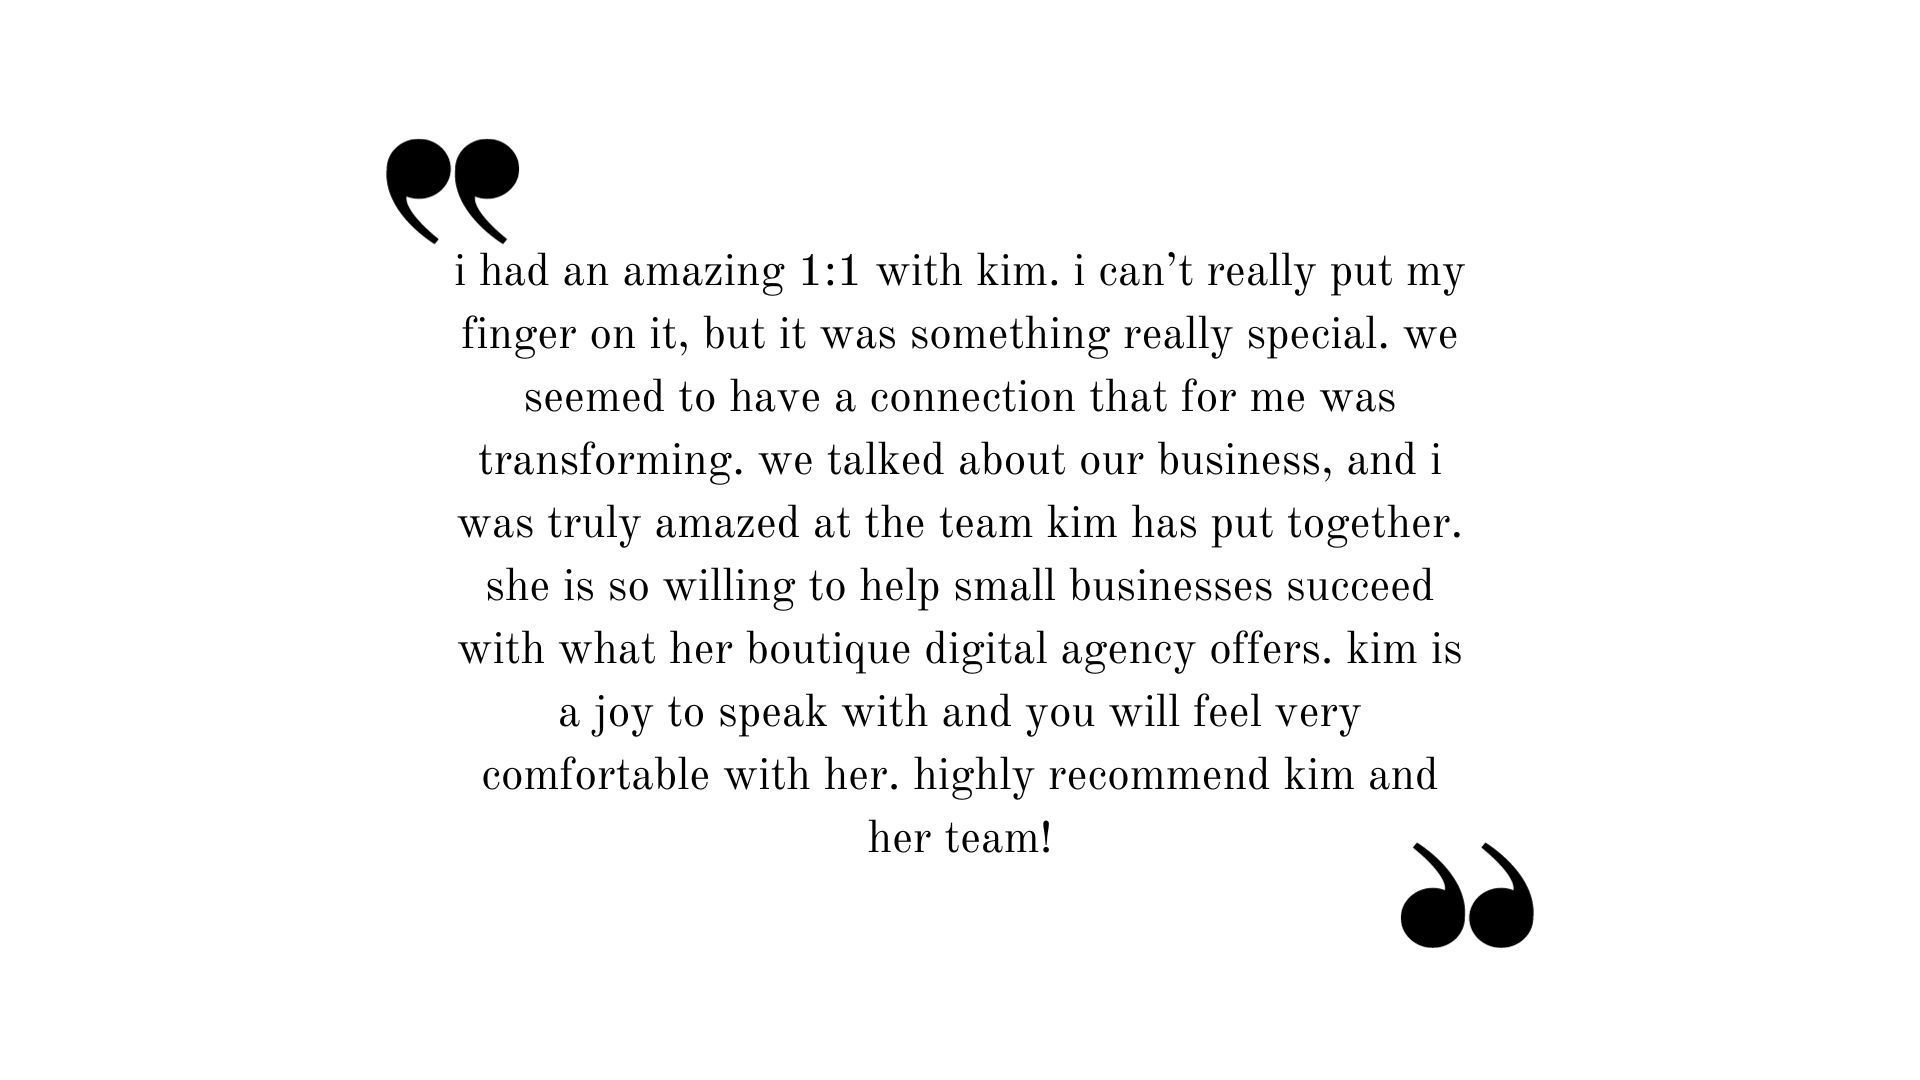 Testimonial: I had an amazing 1:1 with Kim. I can't really put my finger on it, but it was something really special. We seemed to have a connection that for me was transforming. We talked about our businesses, and I was truly amazed by the team Kim has put together. She is so willing to help small businesses succeed with what her boutique digital agency offers. Kim is a joy to speak with and you will feel very comfortable with her. Highly recommend Kim and her team.